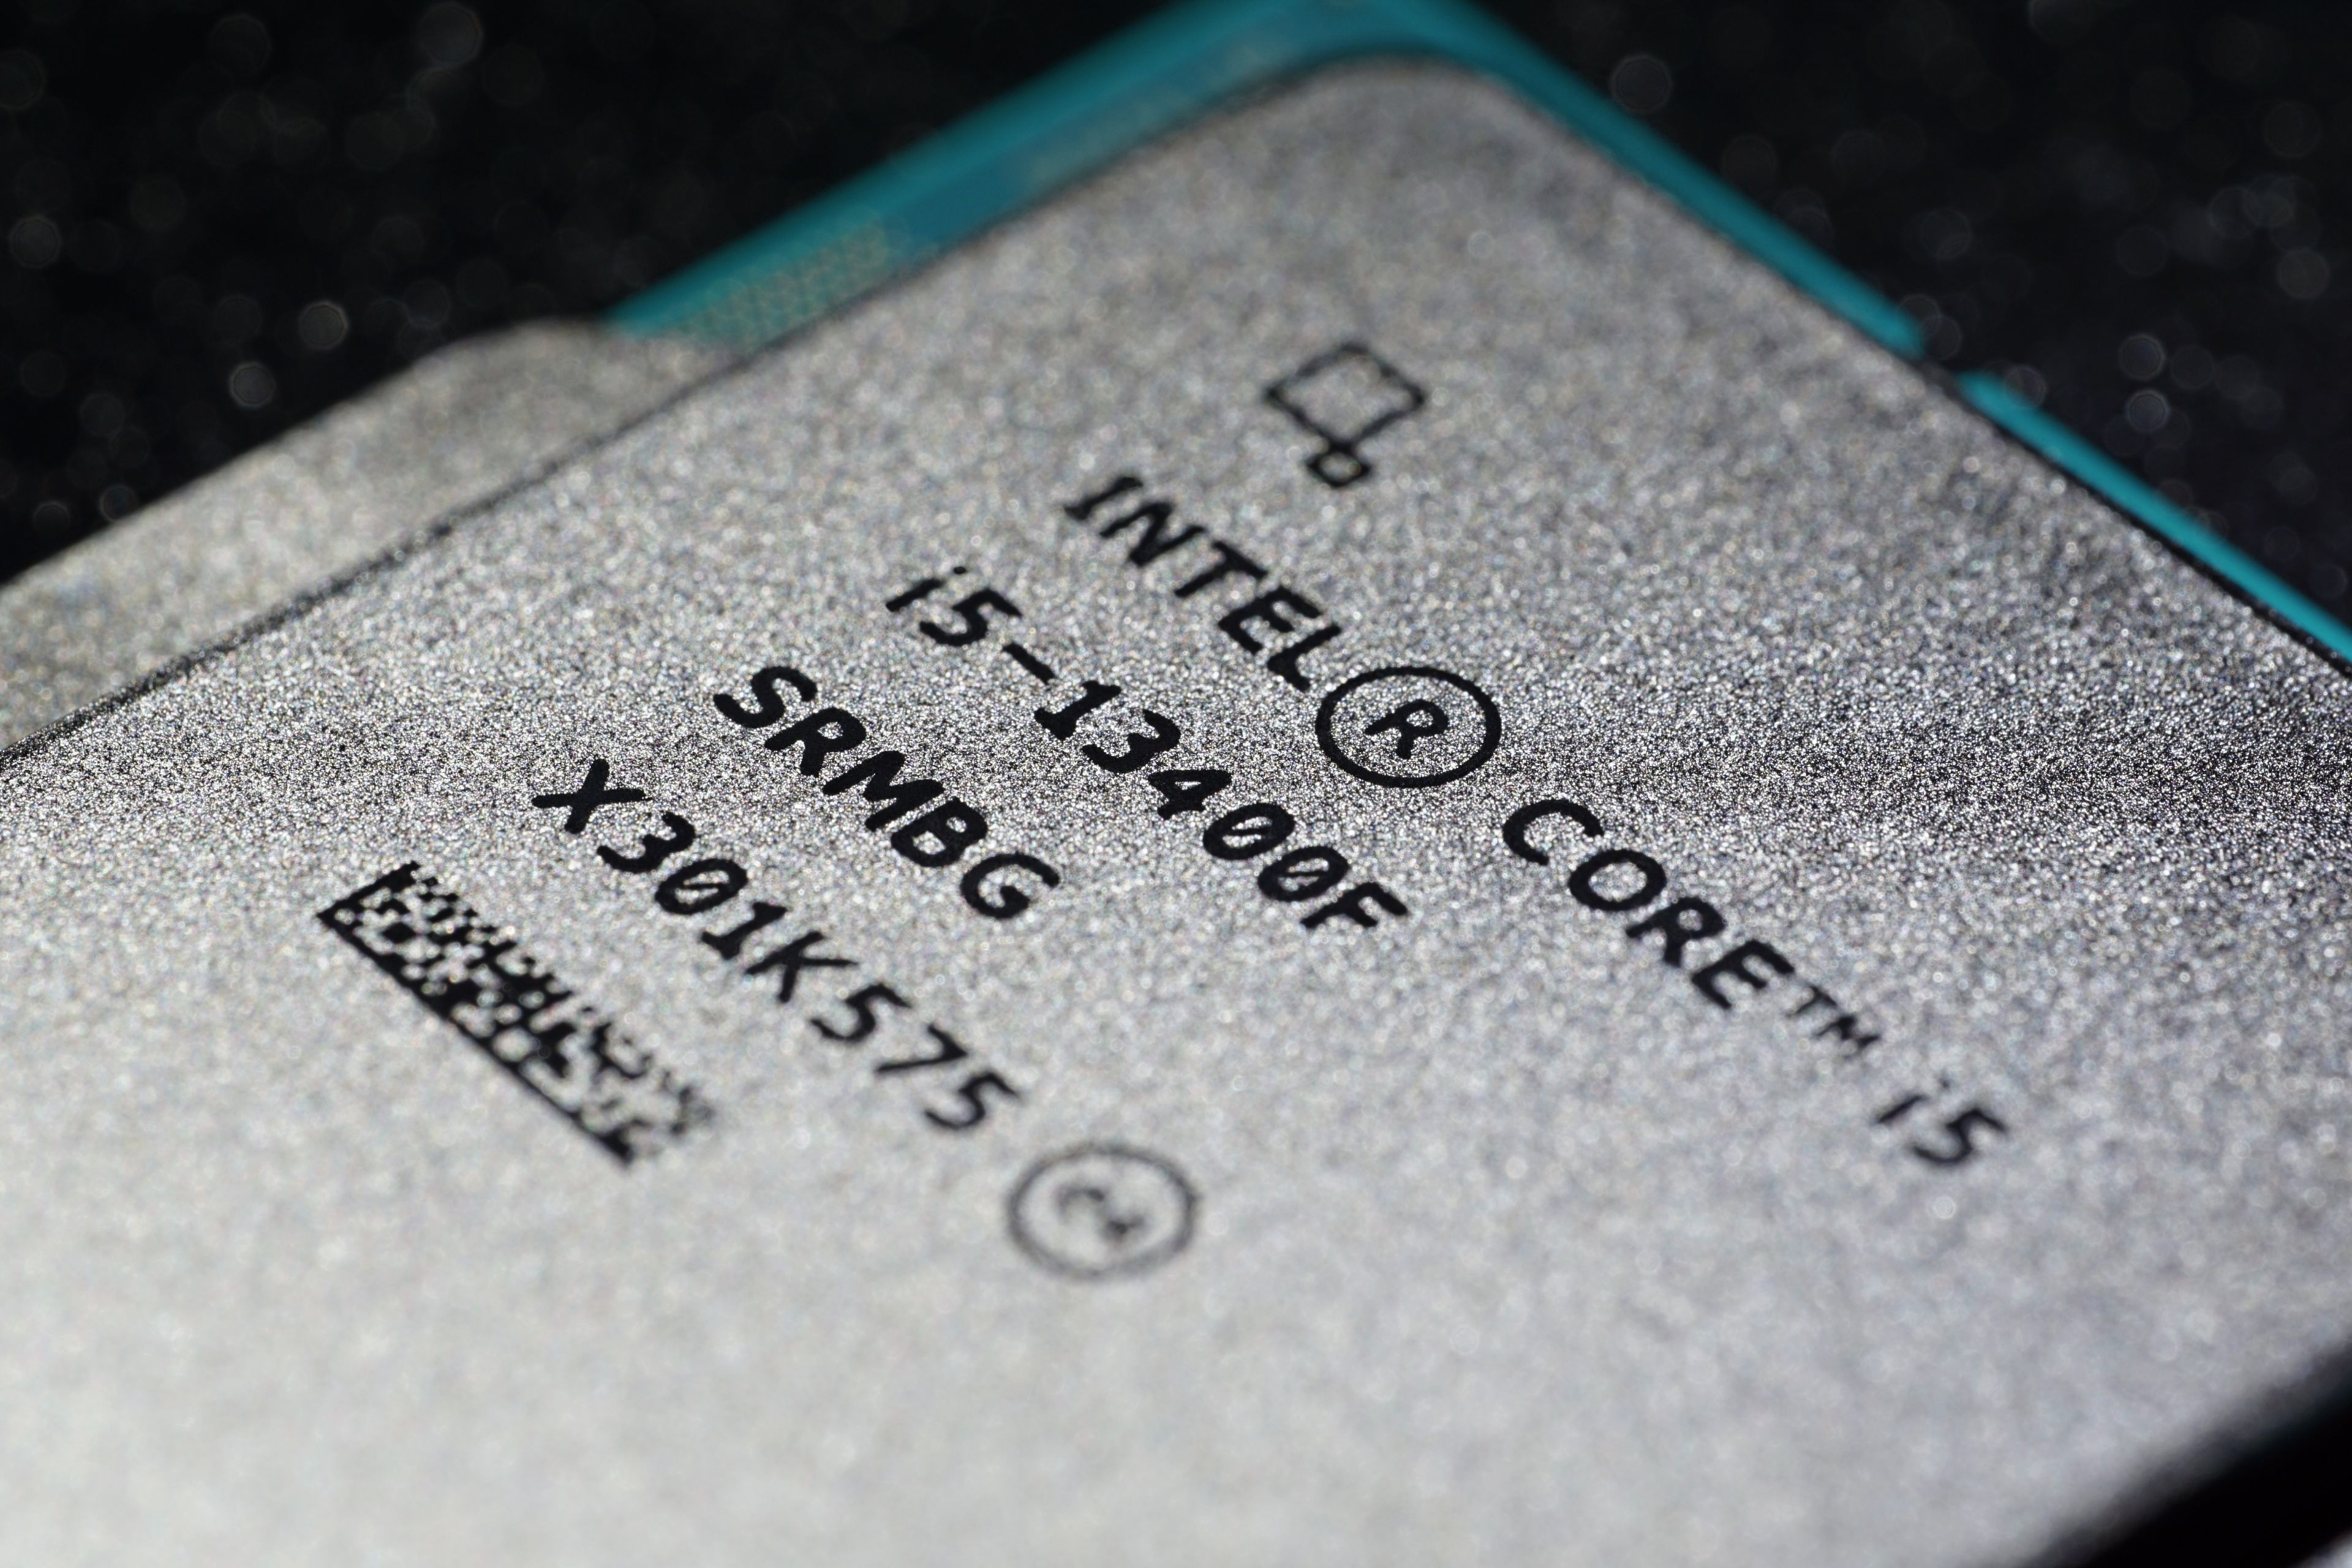 Intel Core i5-13400F Review - Force of Efficiency - Game Tests